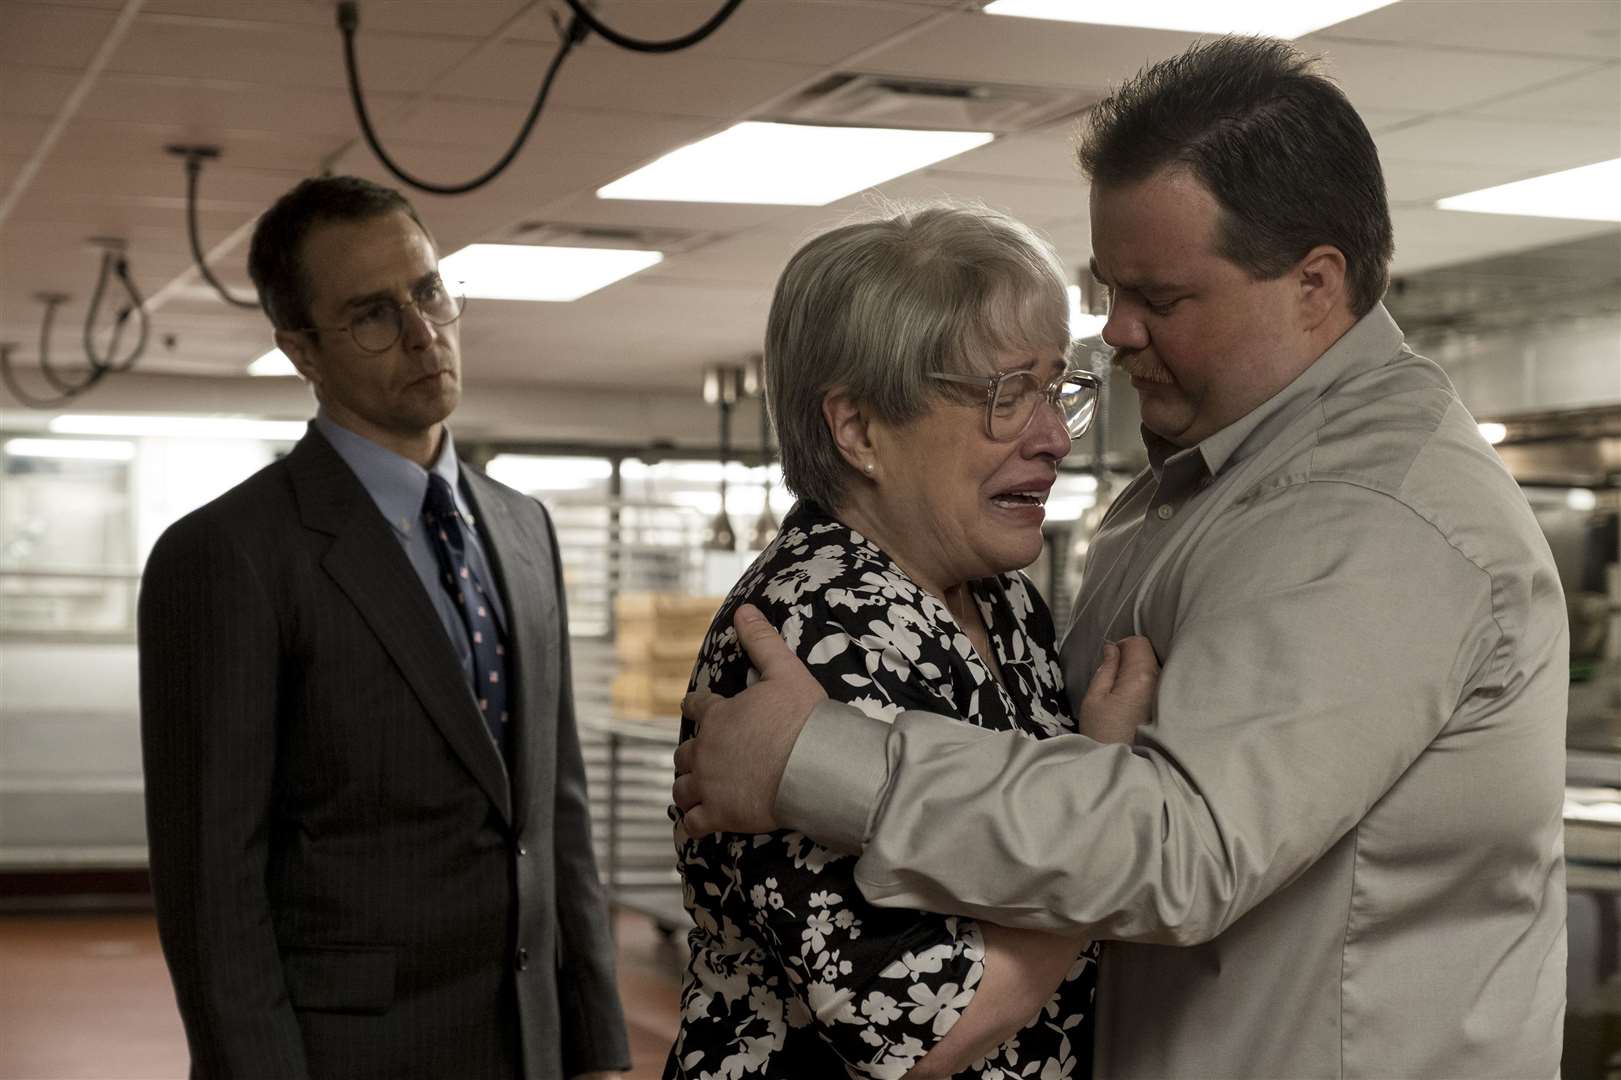 Richard Jewell starring Sam Rockwell as Watson Bryant, Paul Walter Hauser as Richard Jewell and Kathy Bates as Barbara Jewell Picture: PA Photo/Warner Bros. Entertainment Inc./Claire Folger